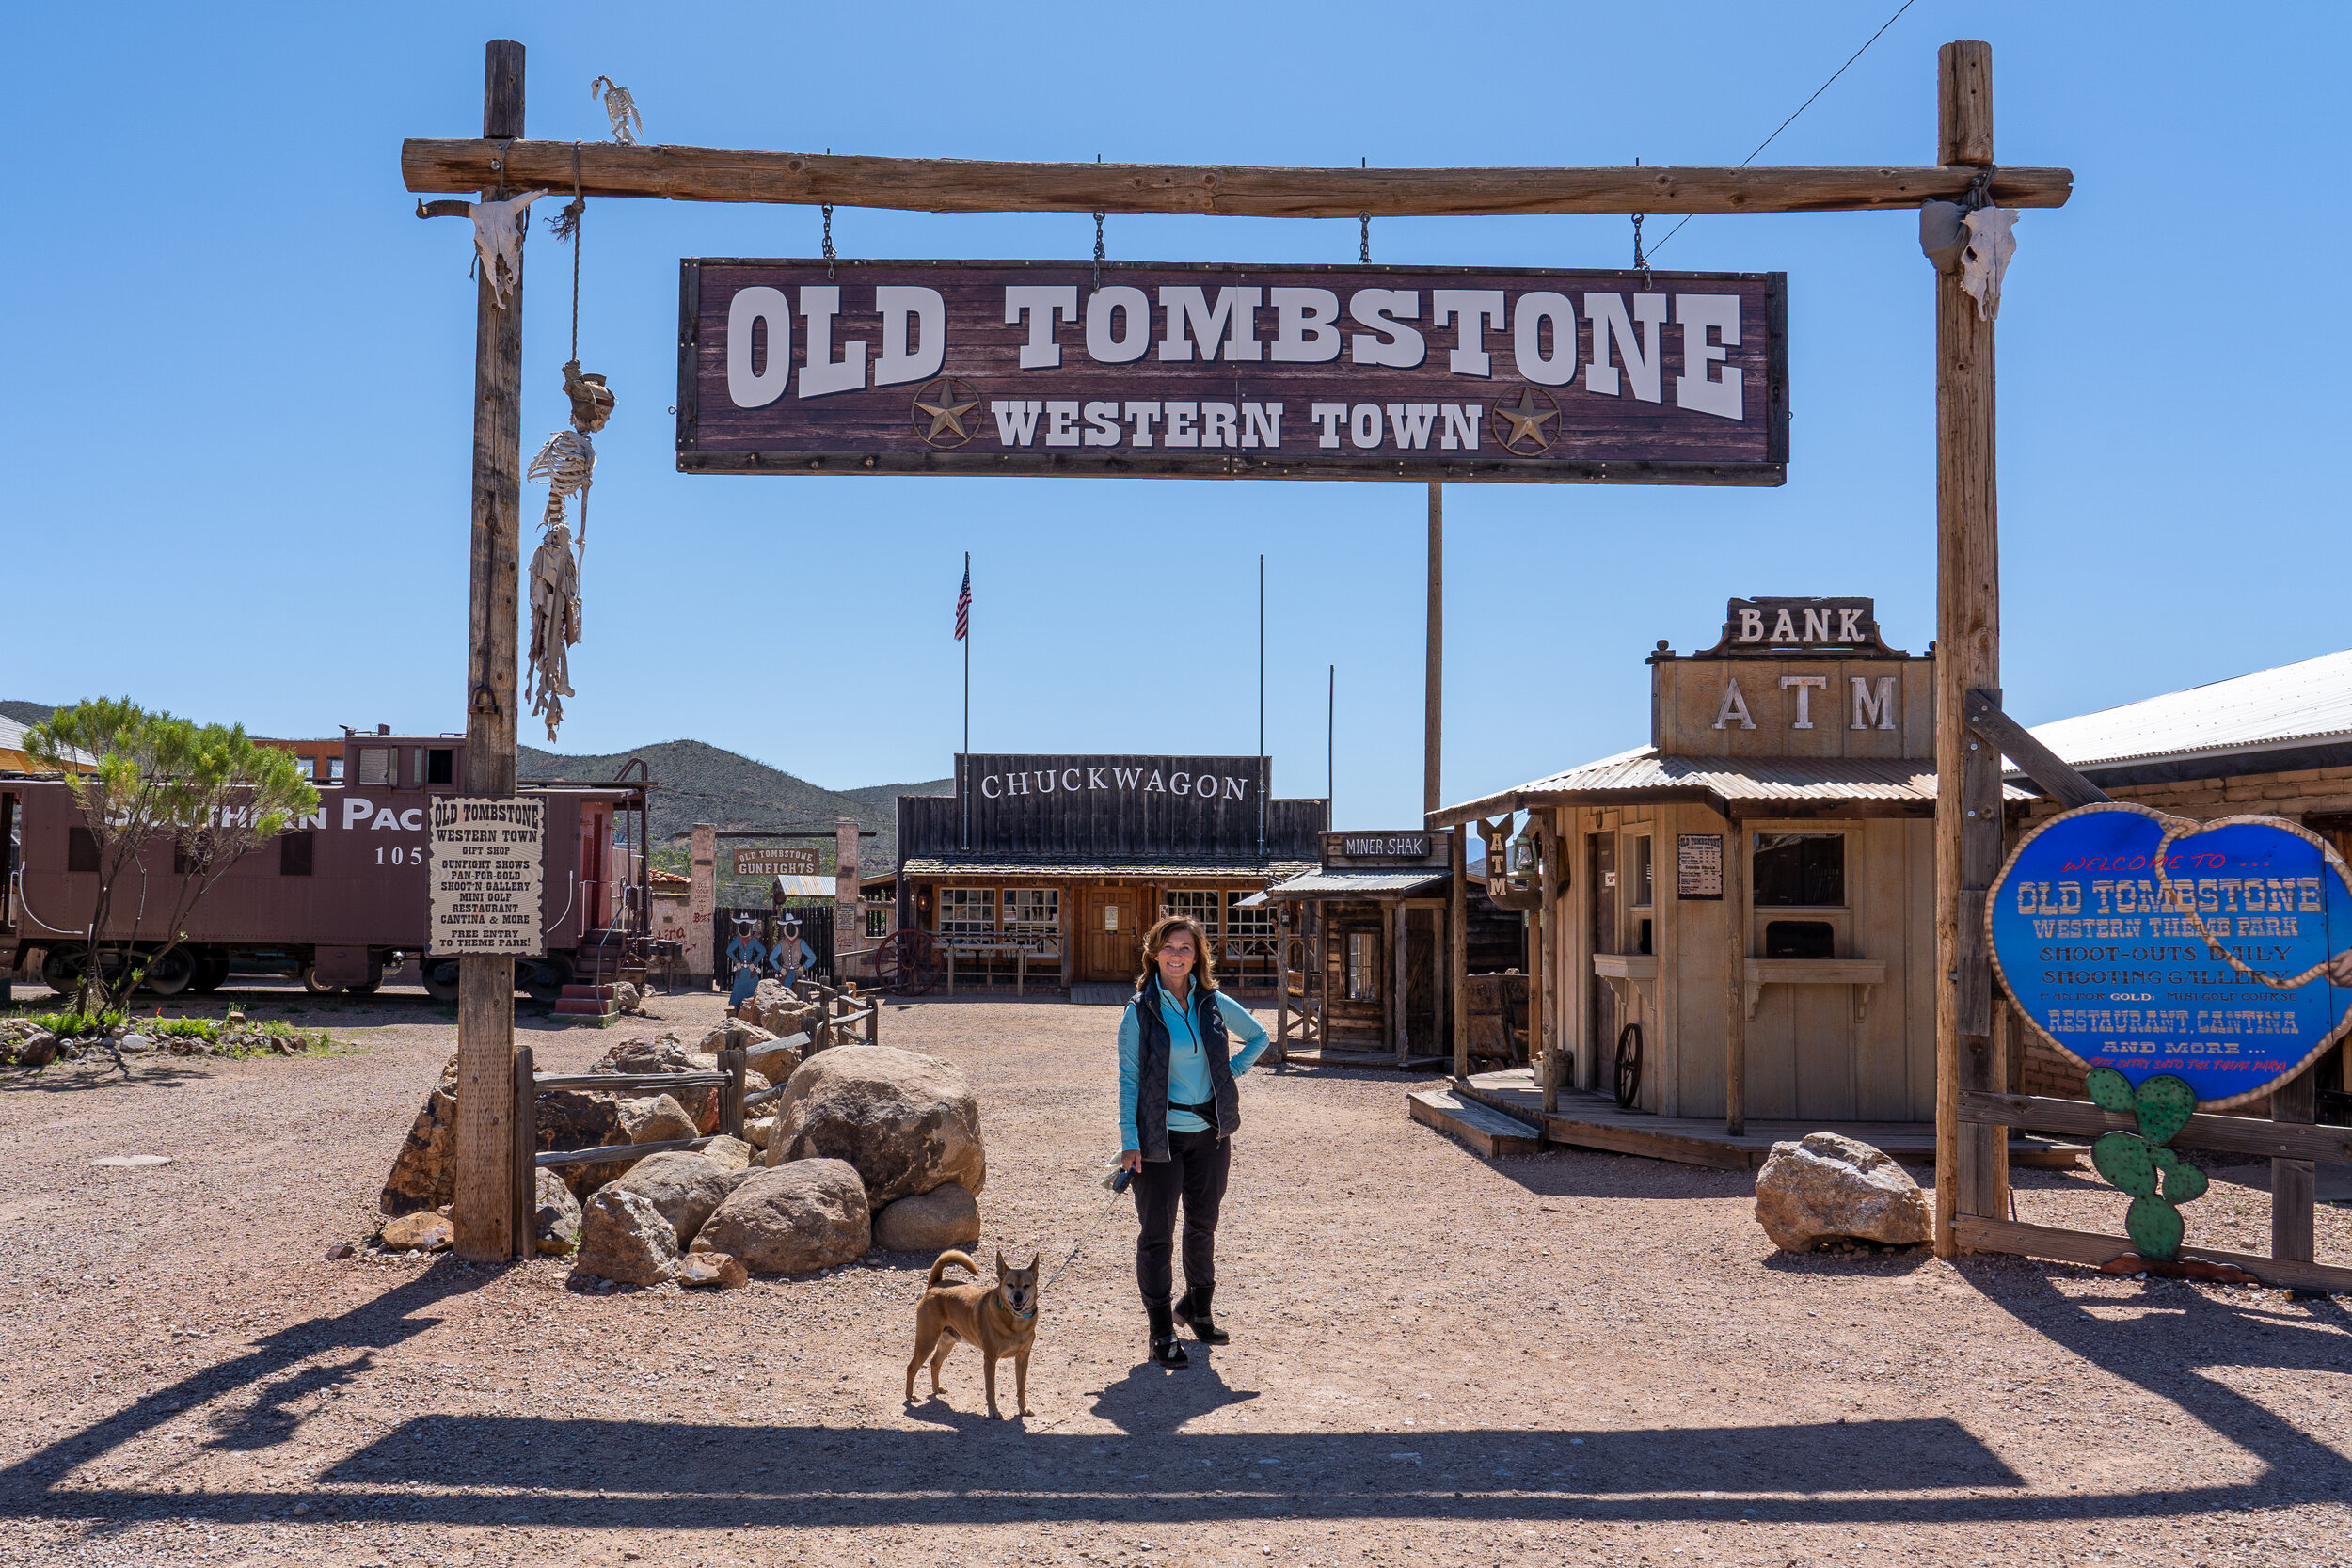  Tombstone was one of the last boomtowns in the American frontier, growing significantly through the mid-1880’s. One of the main draws was the silver mines. 